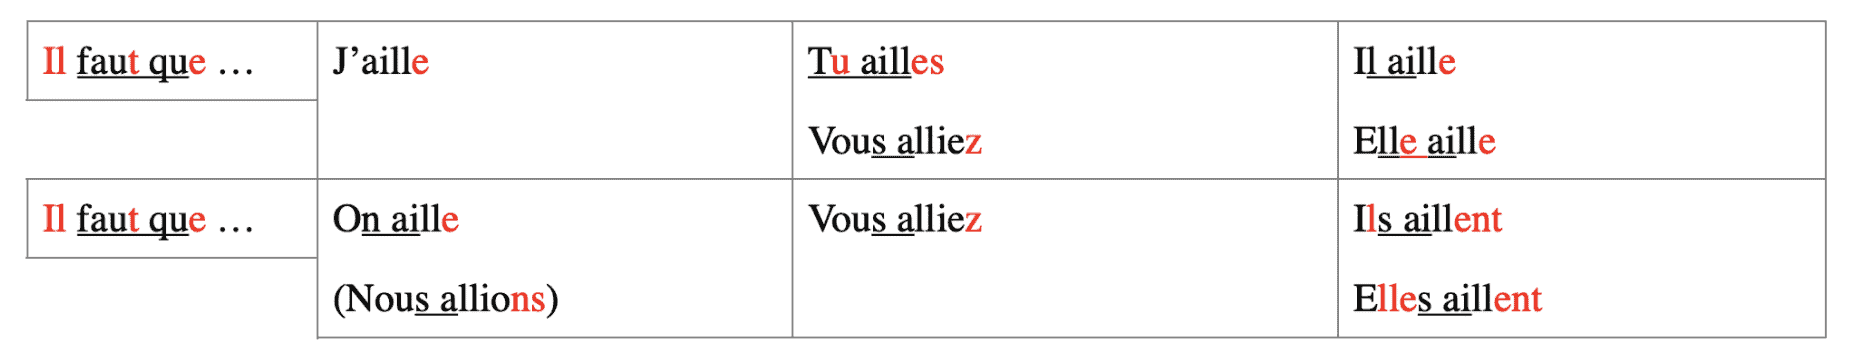 french subjunctive